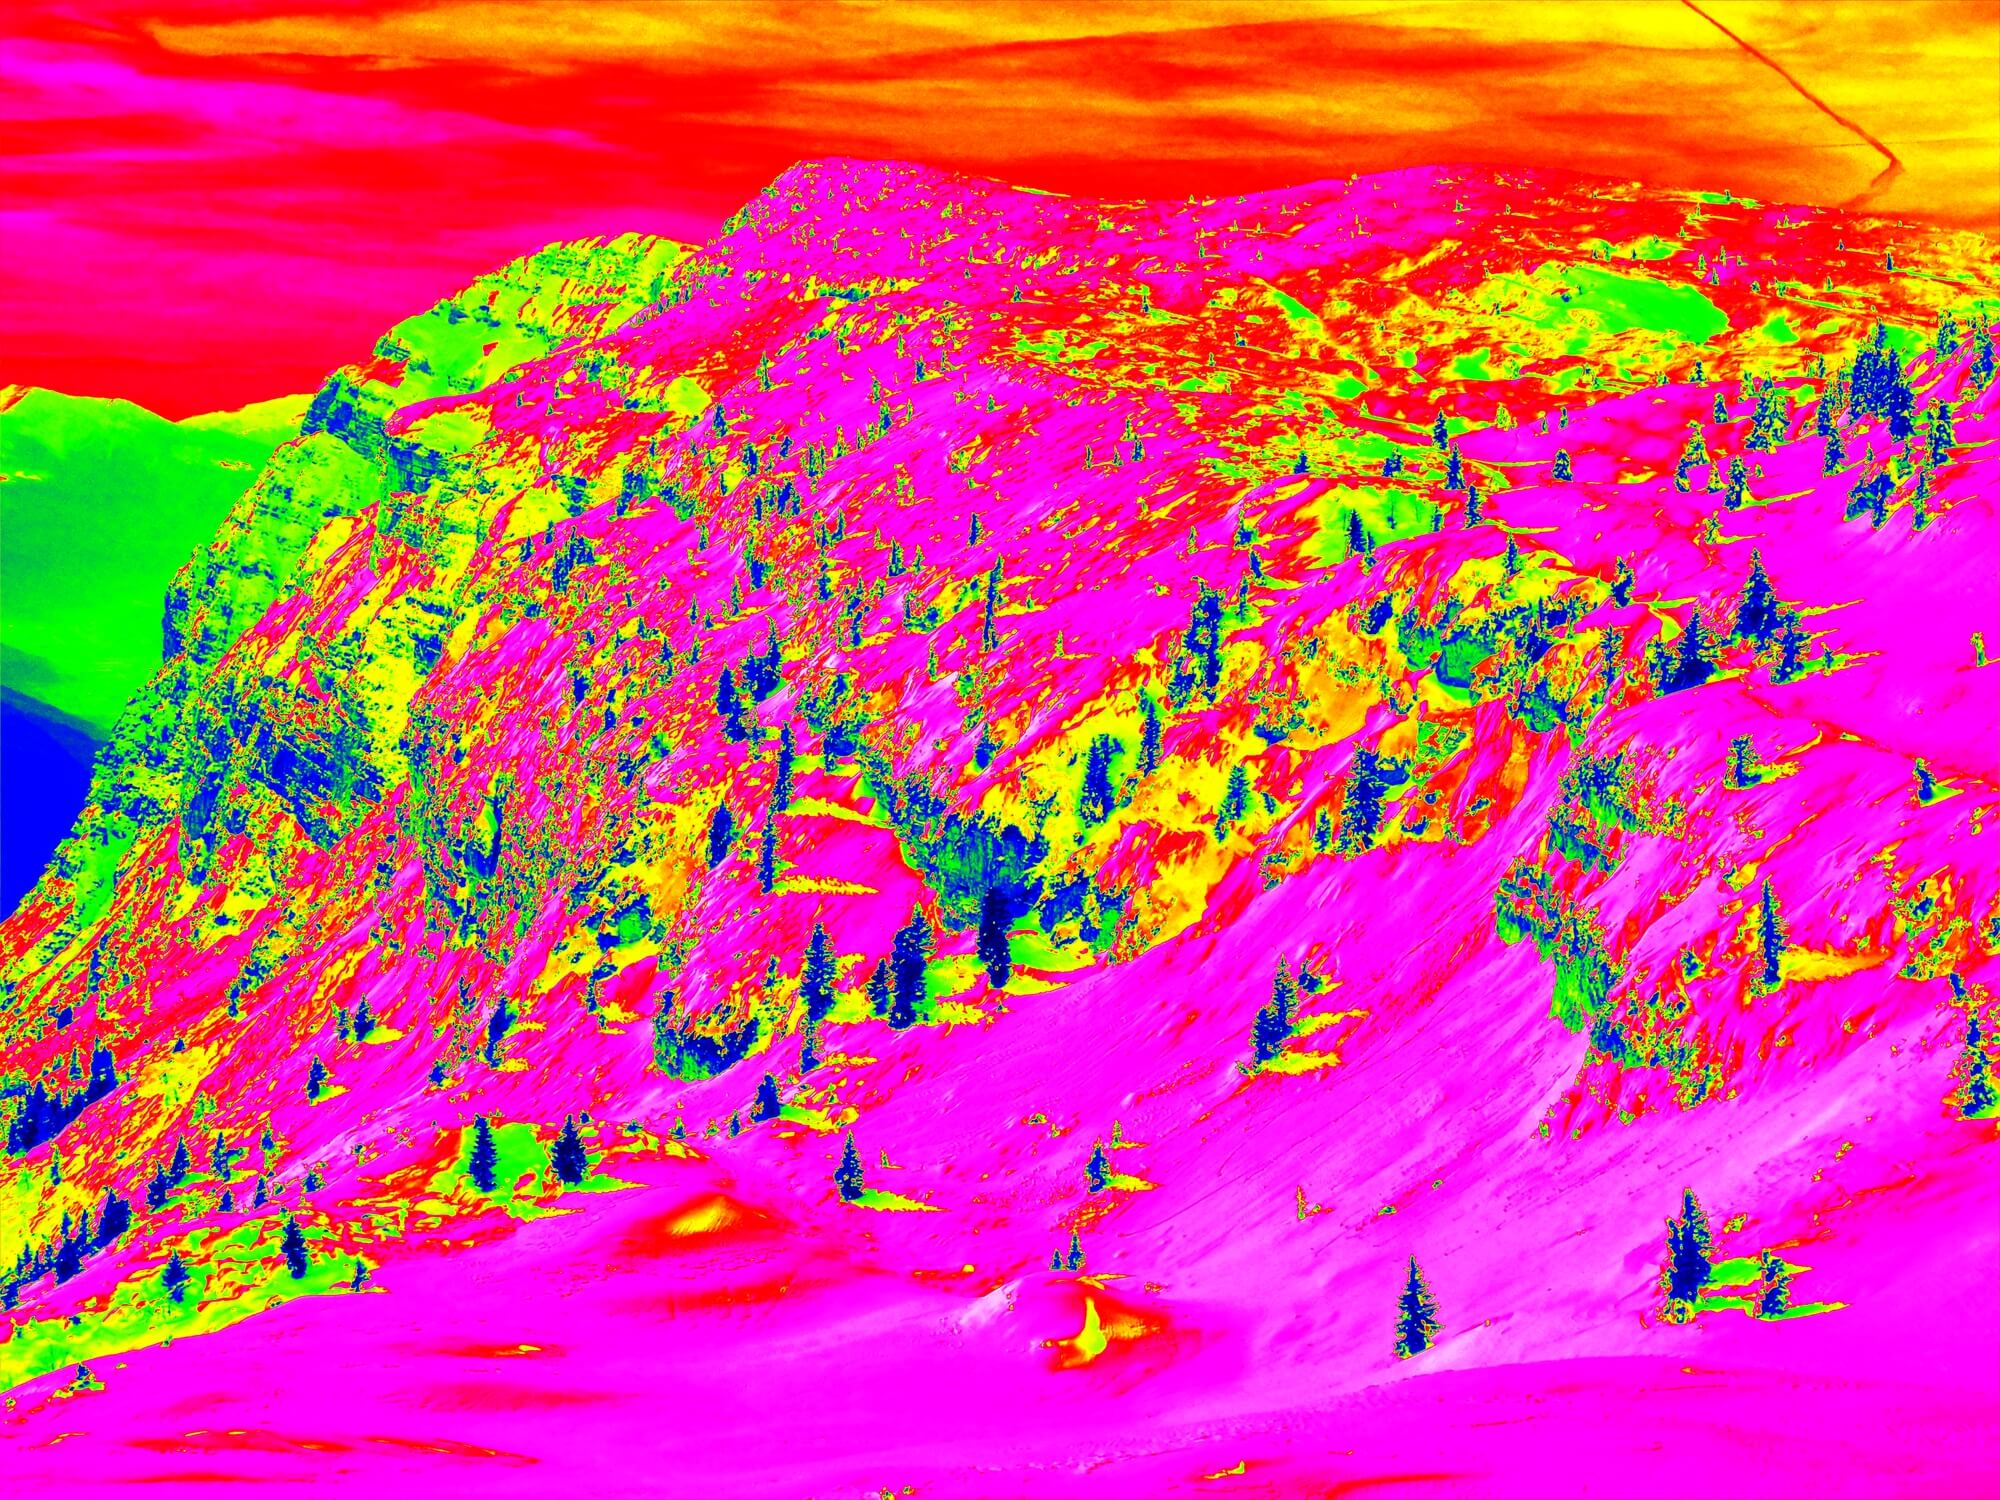 Infrared photography of a ski resort in Europe. Image: depositphotos.com